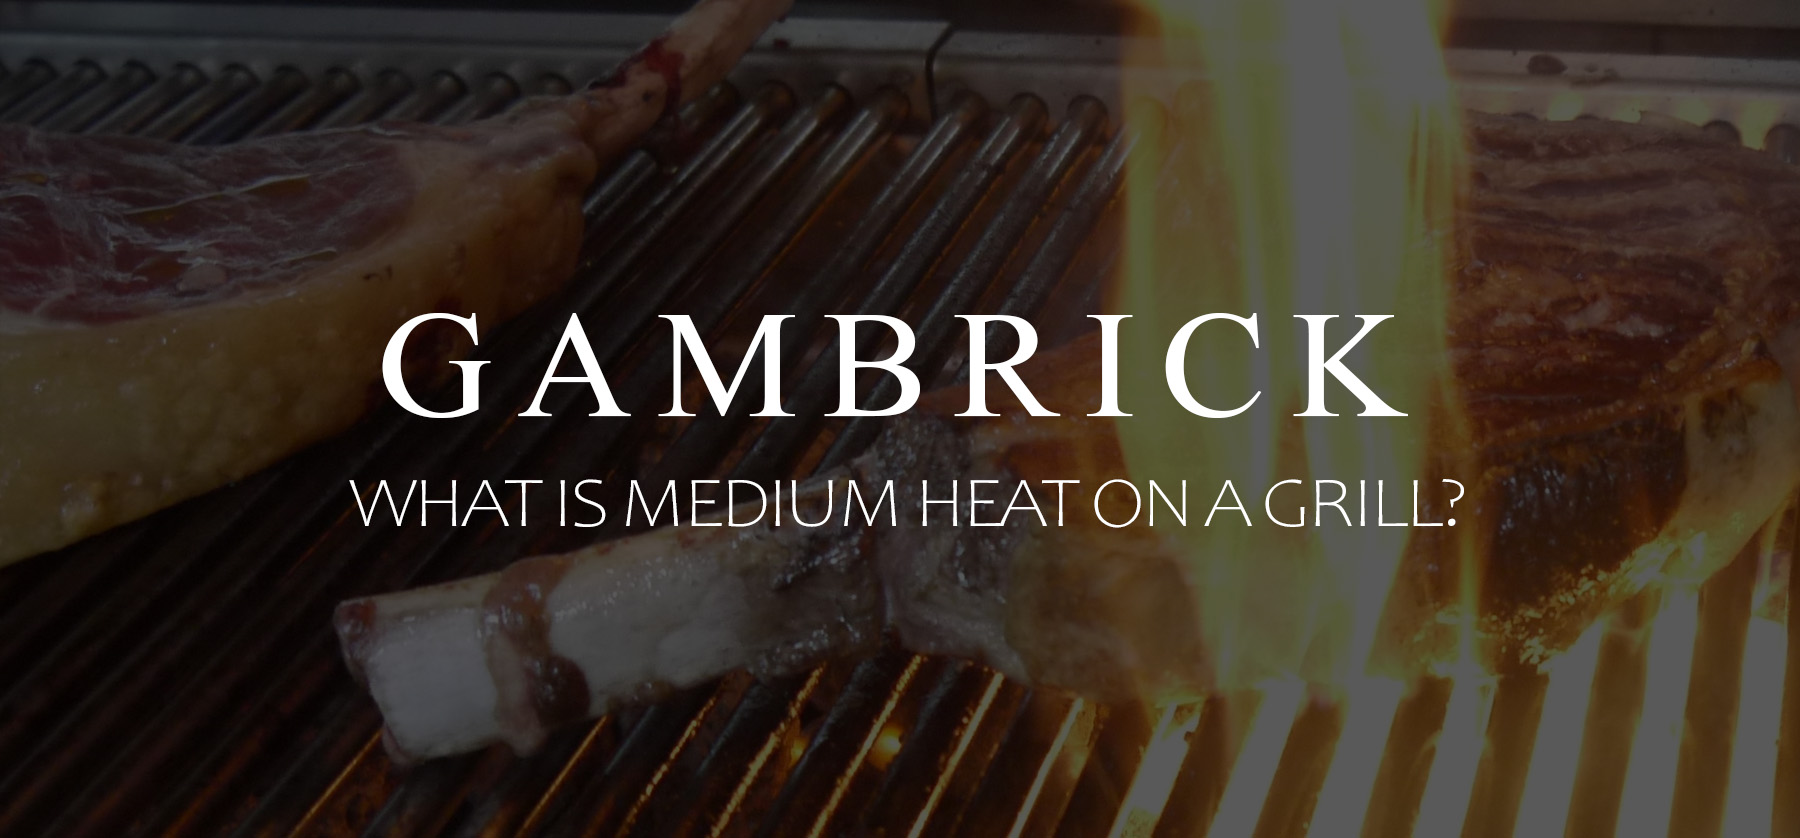 What Is Medium Heat On A Grill? - Gambrick.com